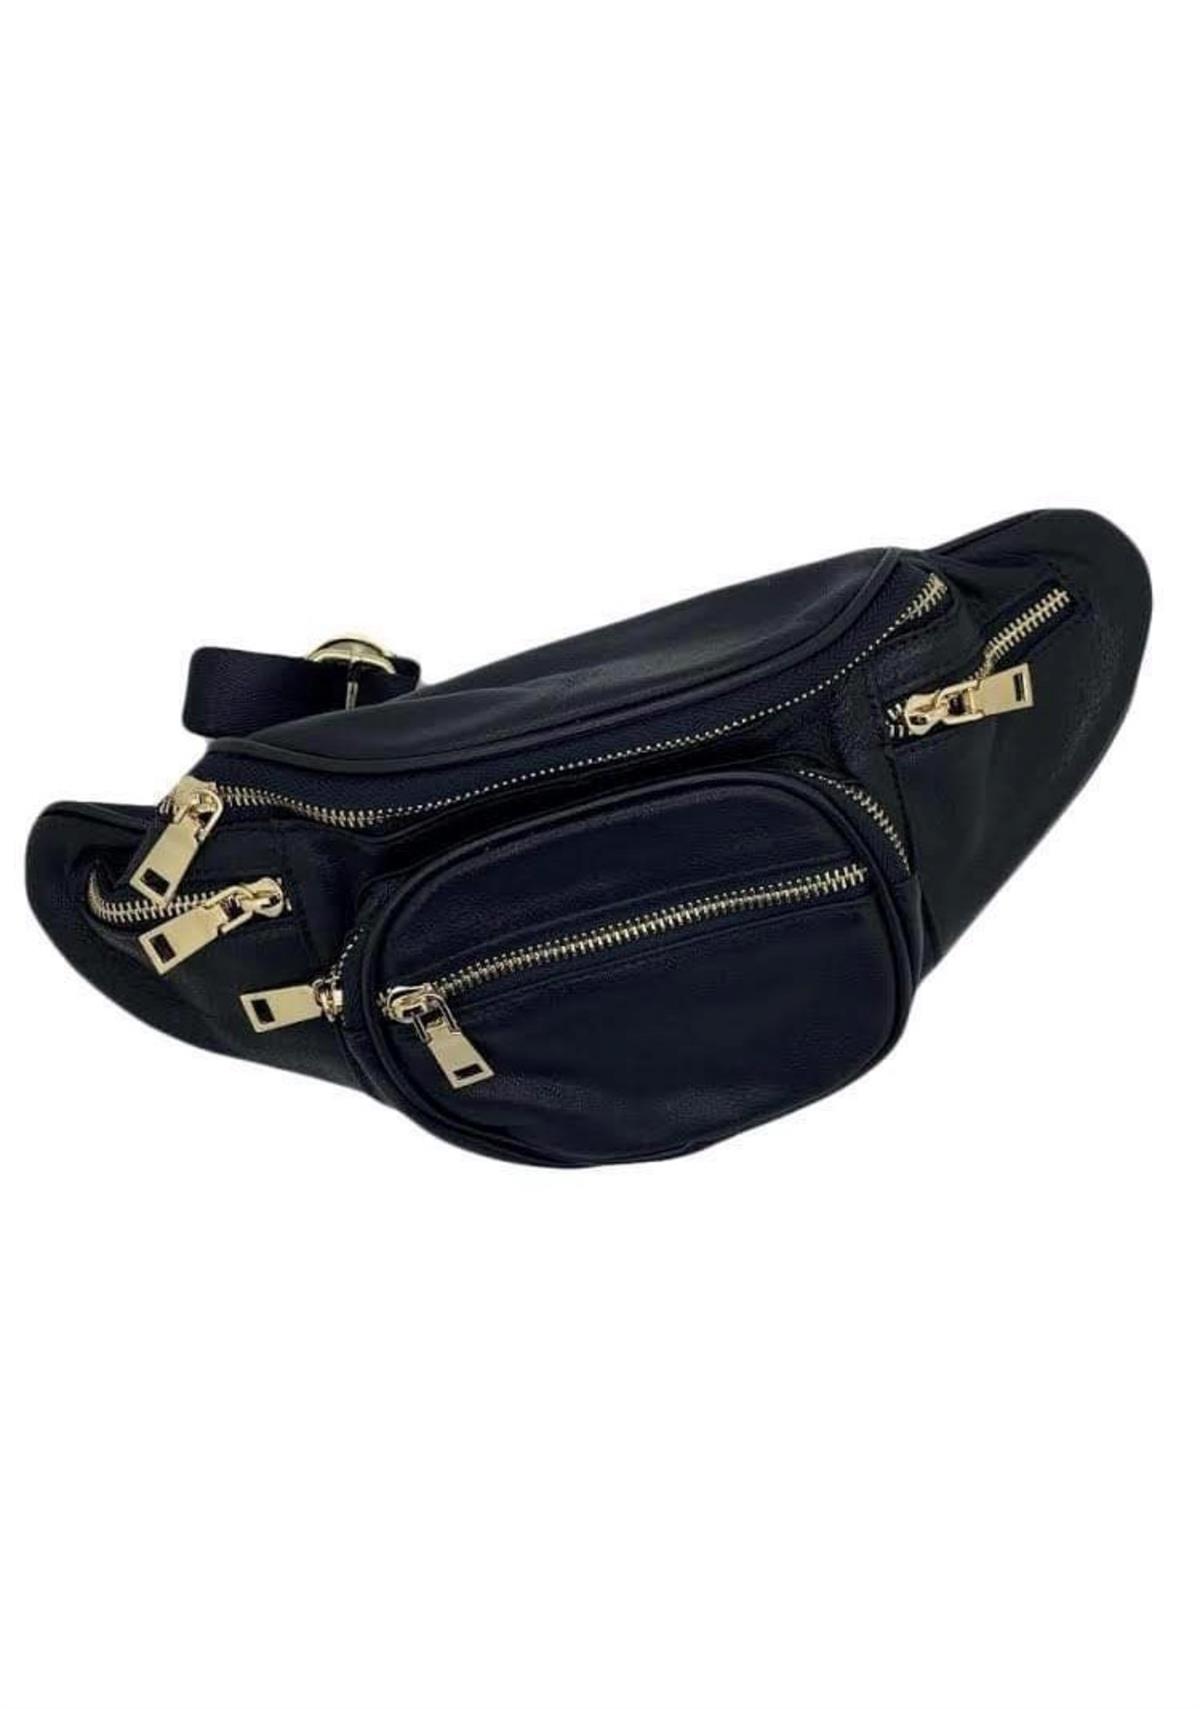 Just D C2-0001 Belt Bag Leather with gold